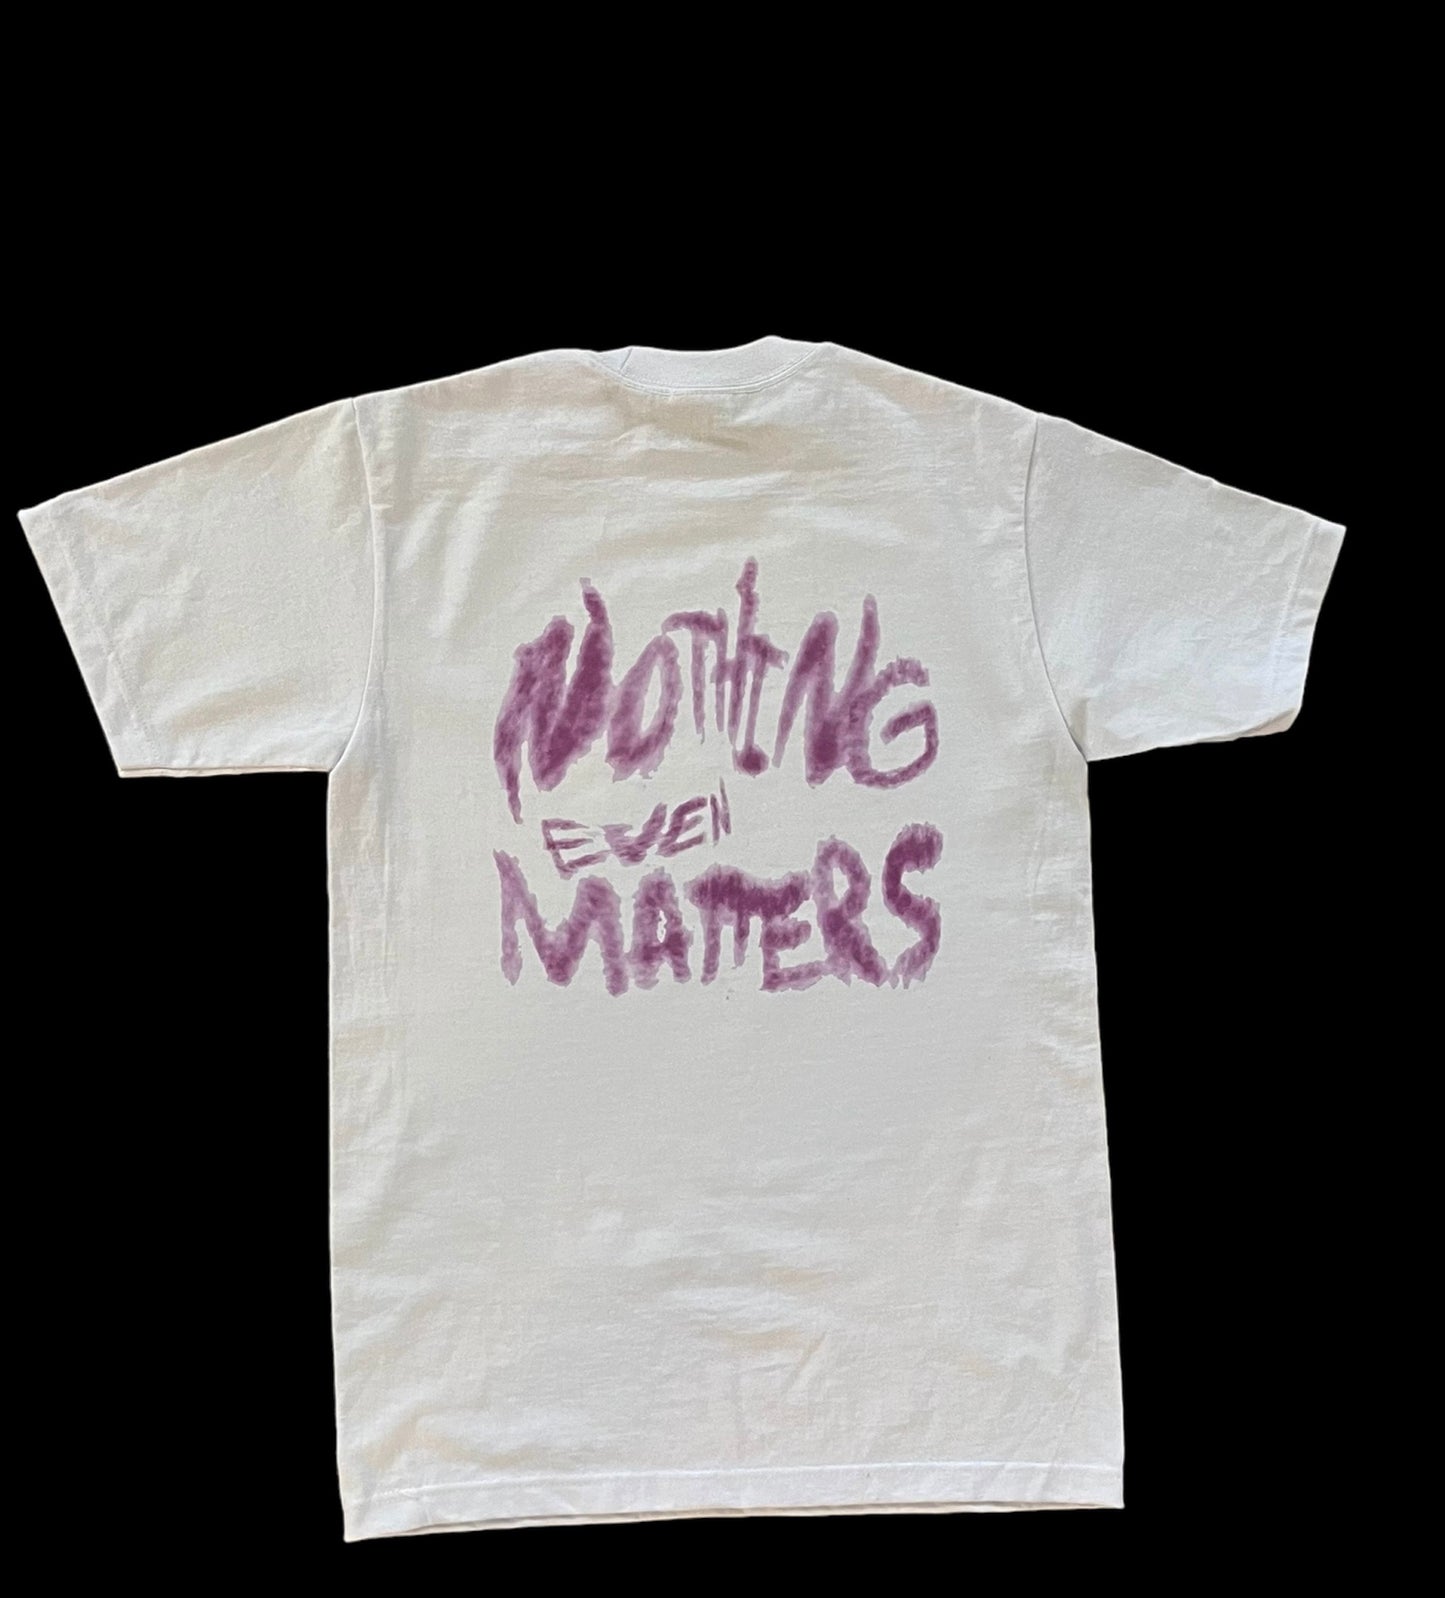 “Nothing even matters” tshirt